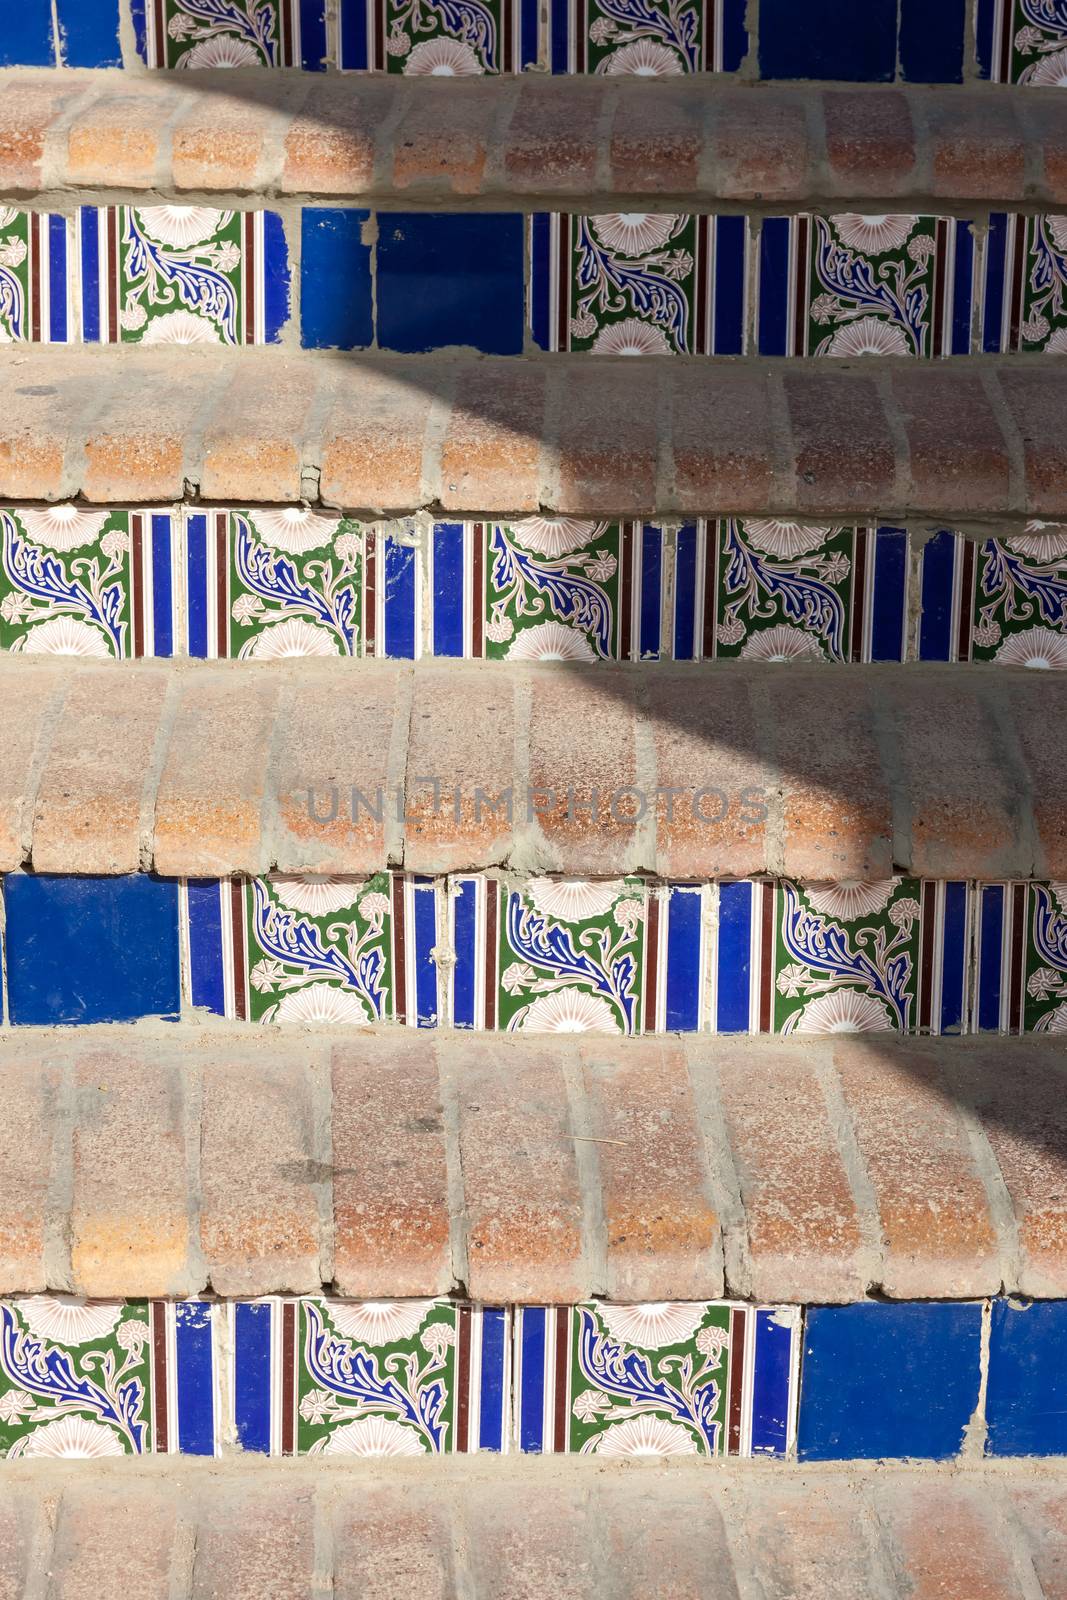 Staircase with patterned ceramic tiles in Egypt